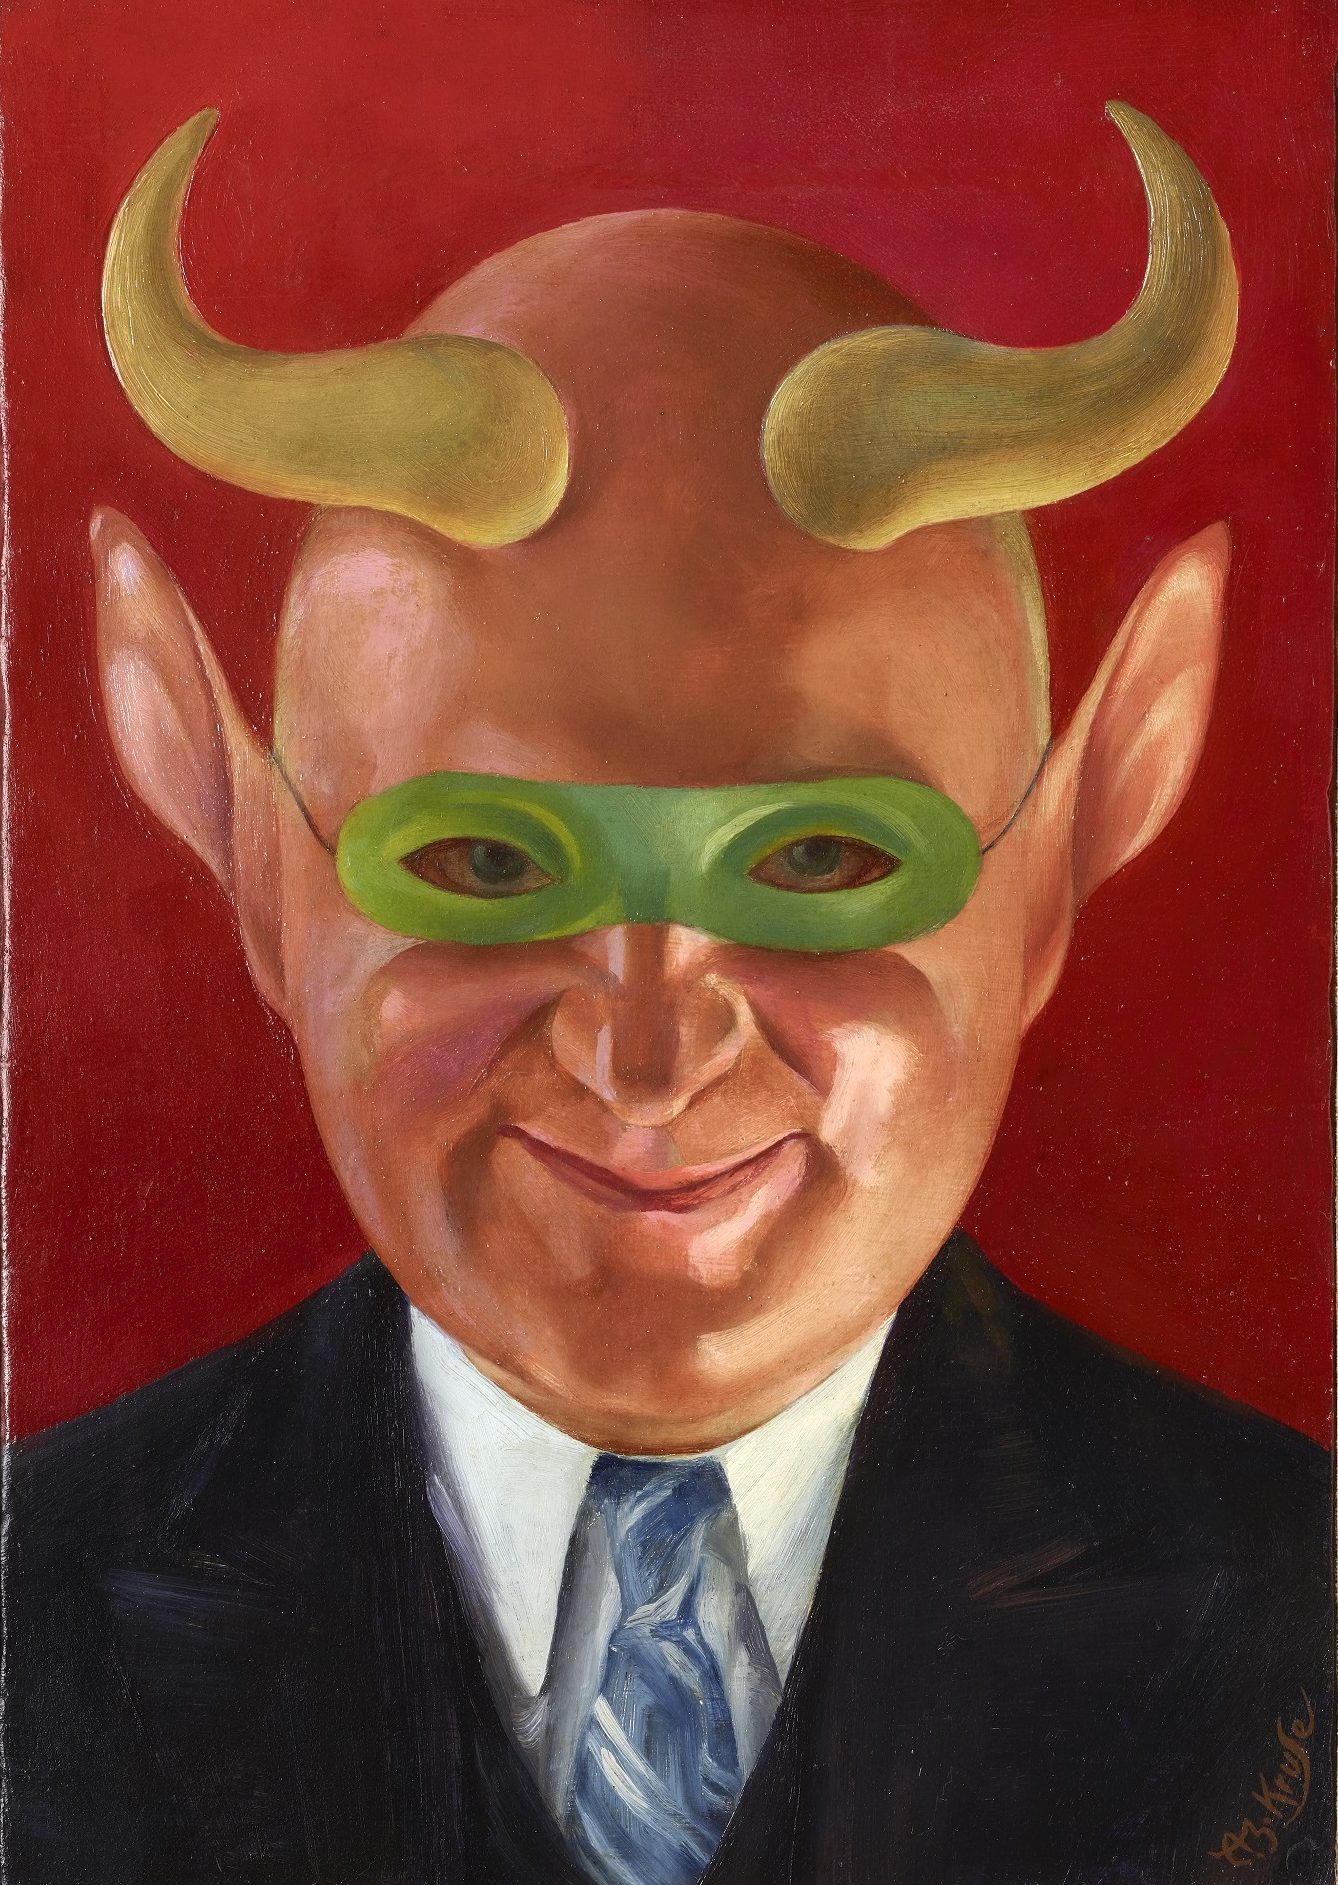 Painting of a bald man in a suit with a green mask over his eyes and yellow horns on his head